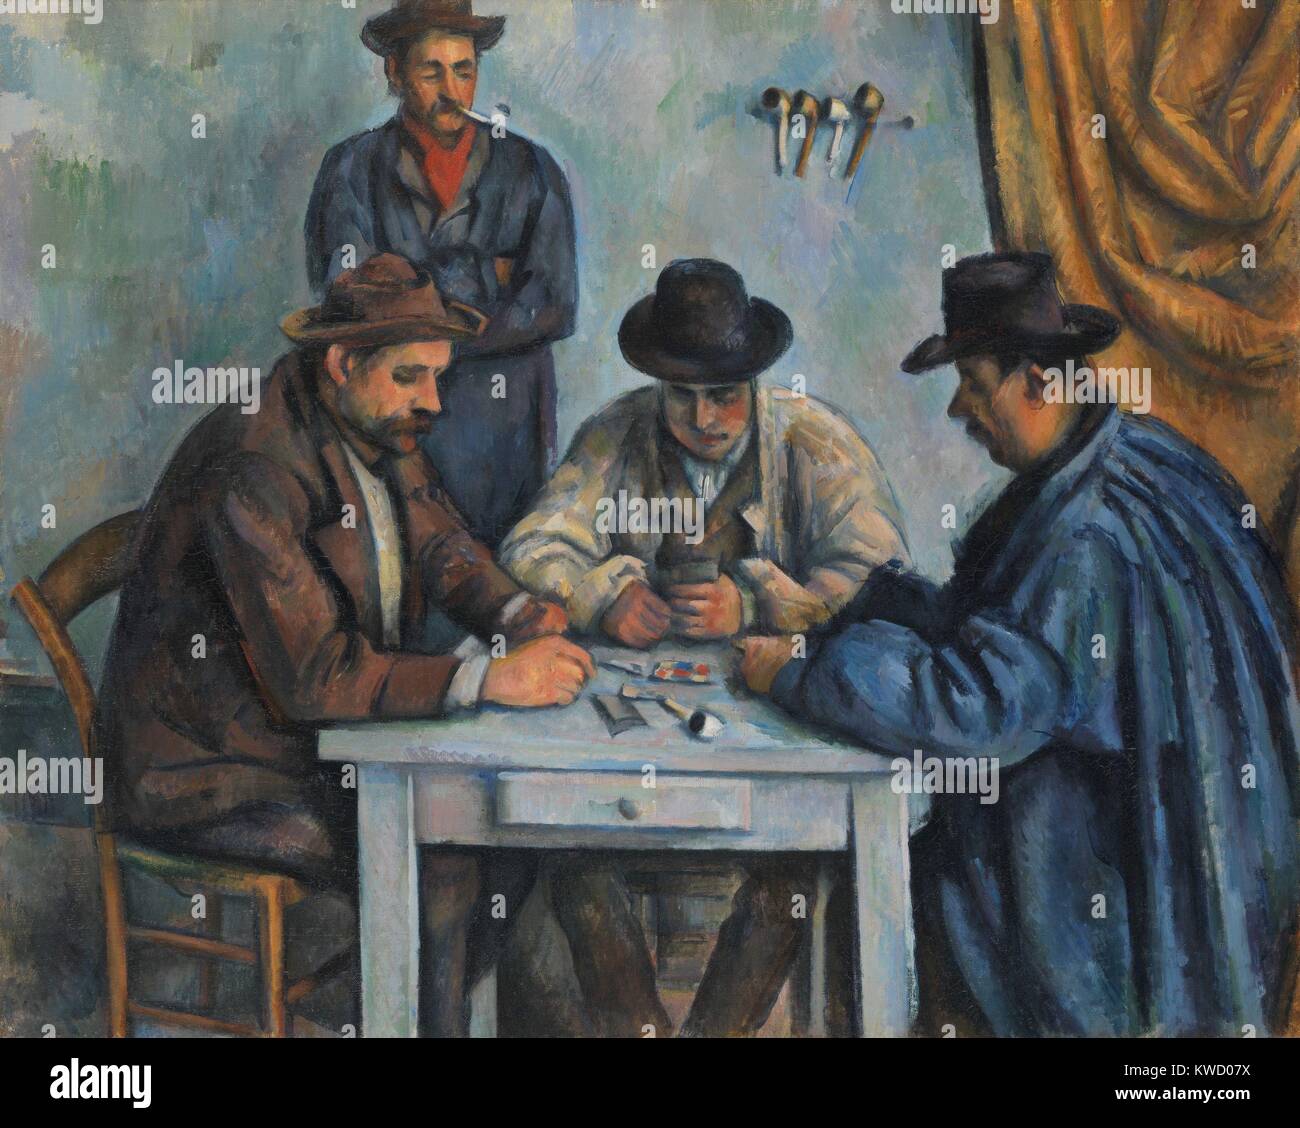 The Card Players, by Paul Cezanne, 1890-92, French Post-Impressionist  painting, oil on canvas. This is believed to be the first of five paintings  Cezanne made of peasants playing cards (BSLOC 2017 5